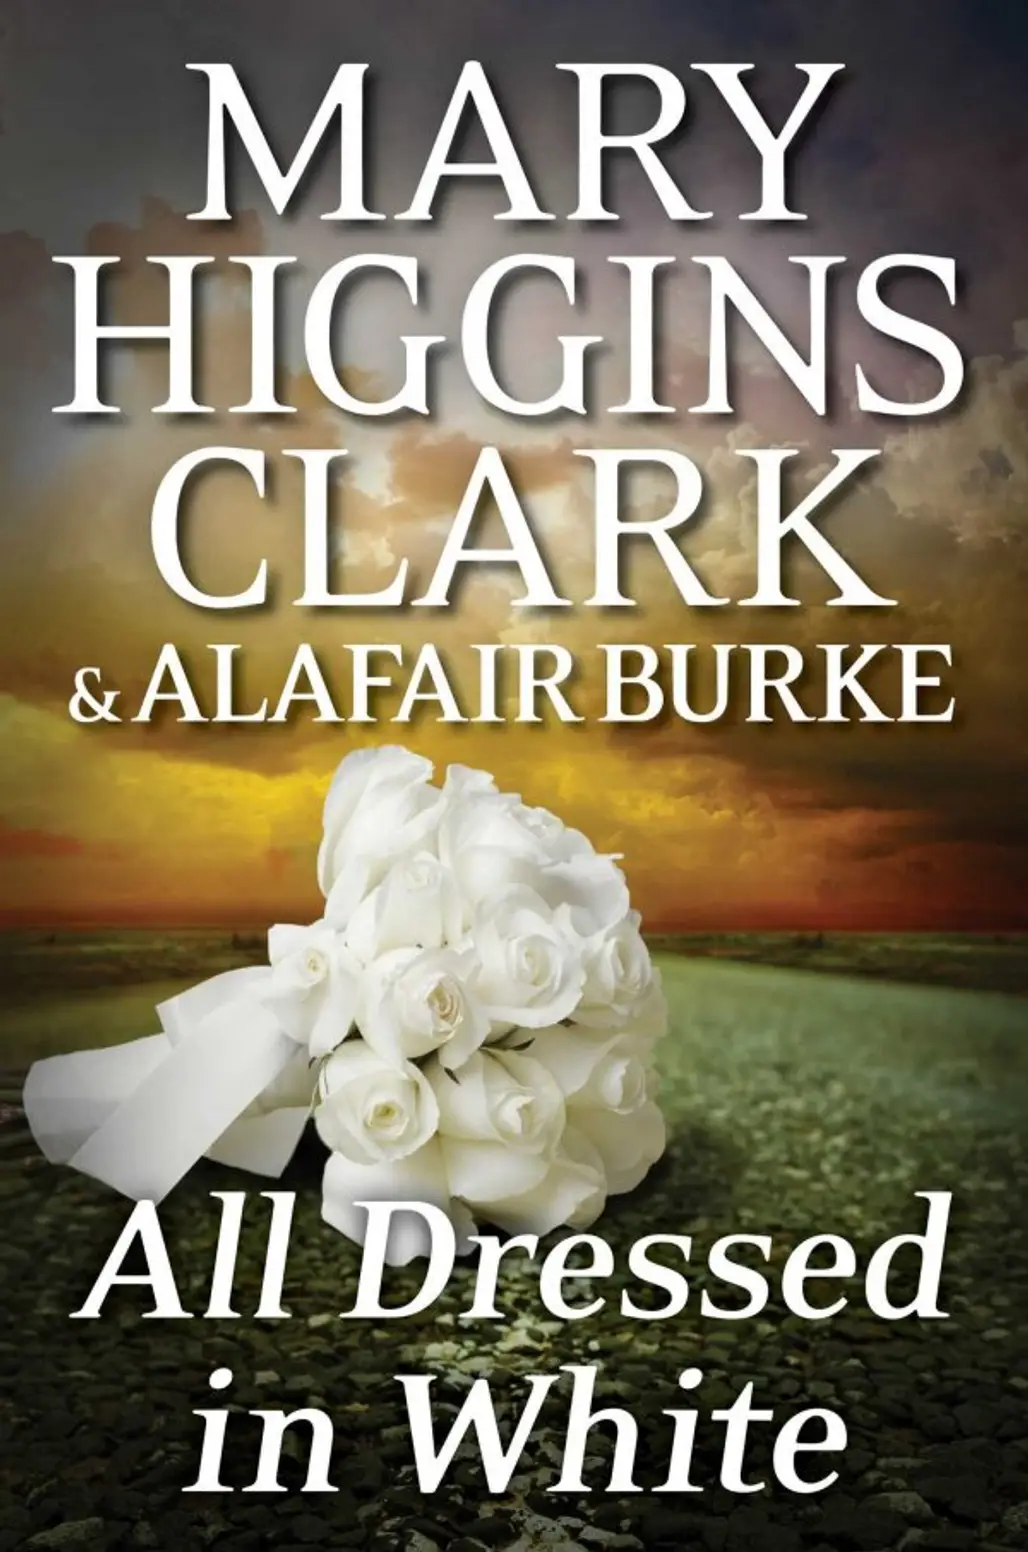 ALL DRESSED in WHITE by Mary Higgins Clark and Alafair Burke